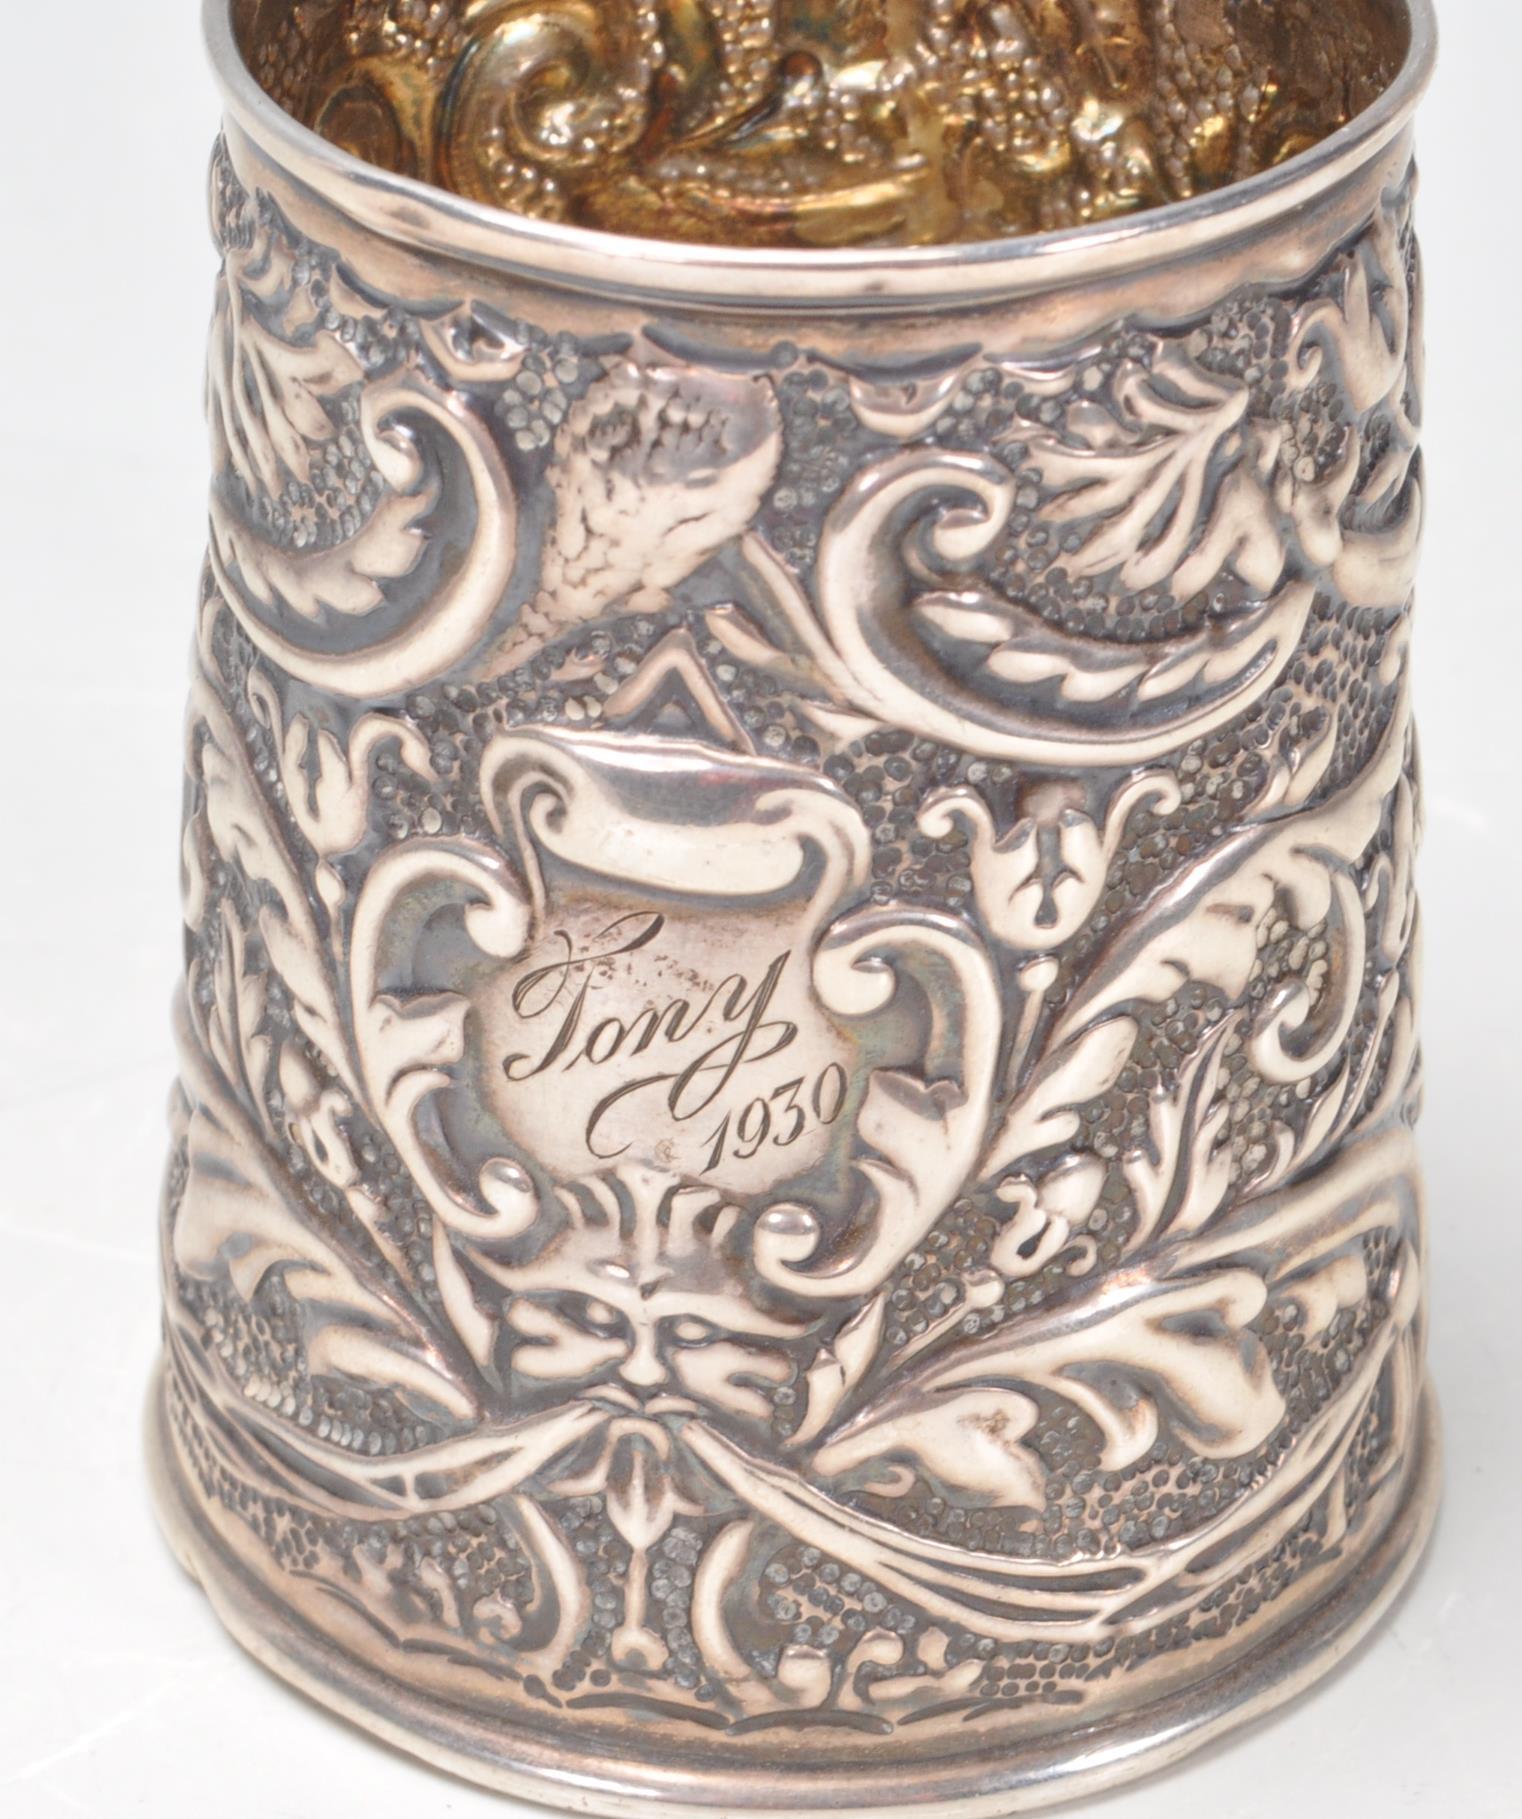 EDWARDIAN SILVER CHRISTENING CUP - Image 5 of 7